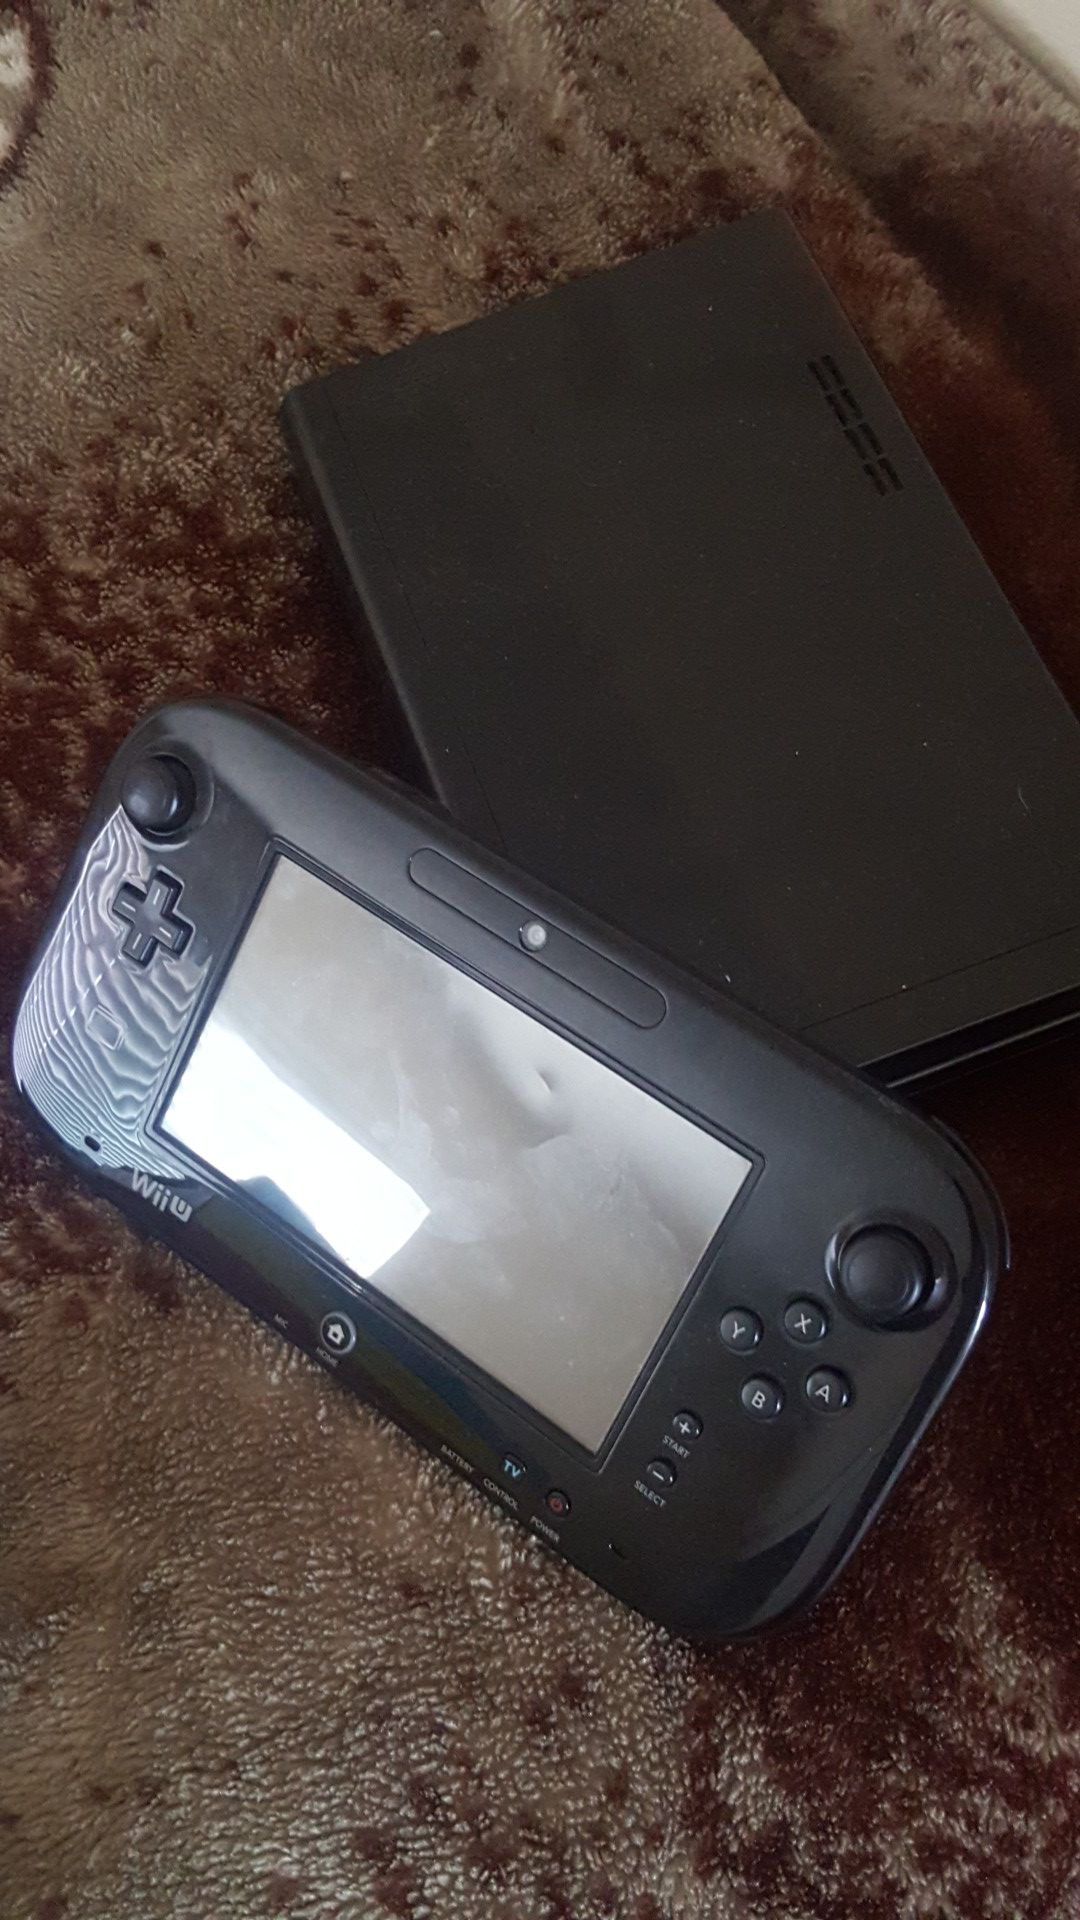 Wii u +Games (gamepad charger not included)